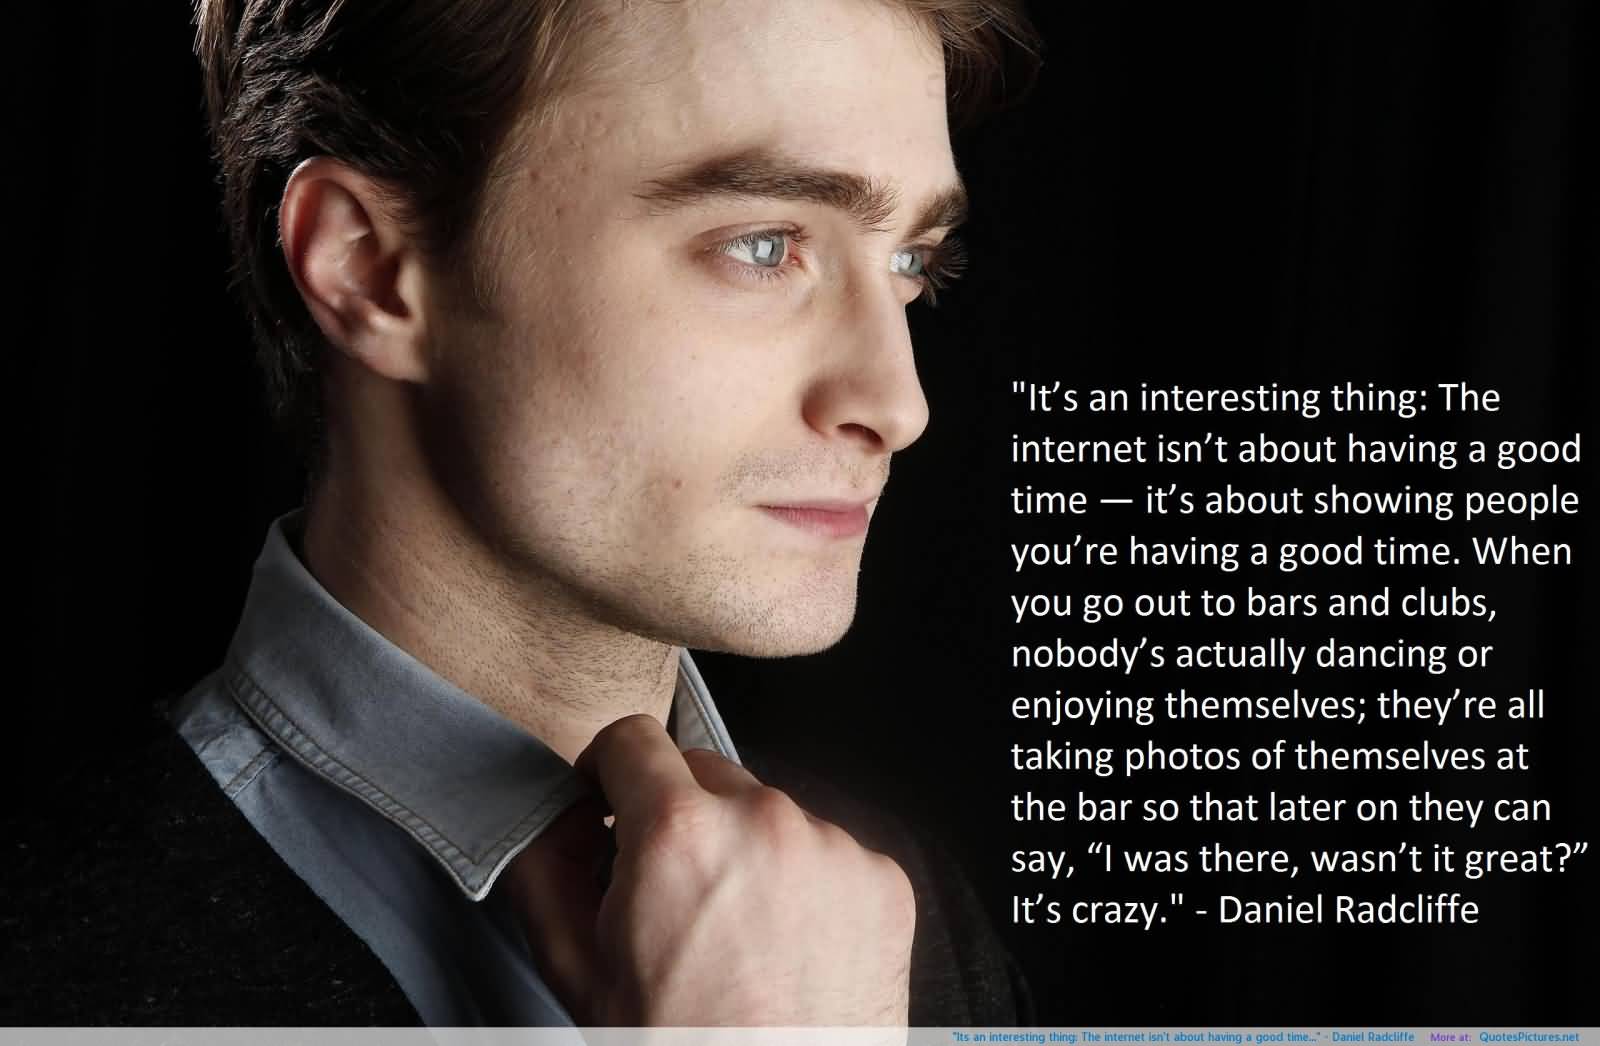 It's an interesting thing; The internet isn't about having a good time, it's about showing people you're having a good time. When you gout to bars and clubs,.. Daniel Radcliffe